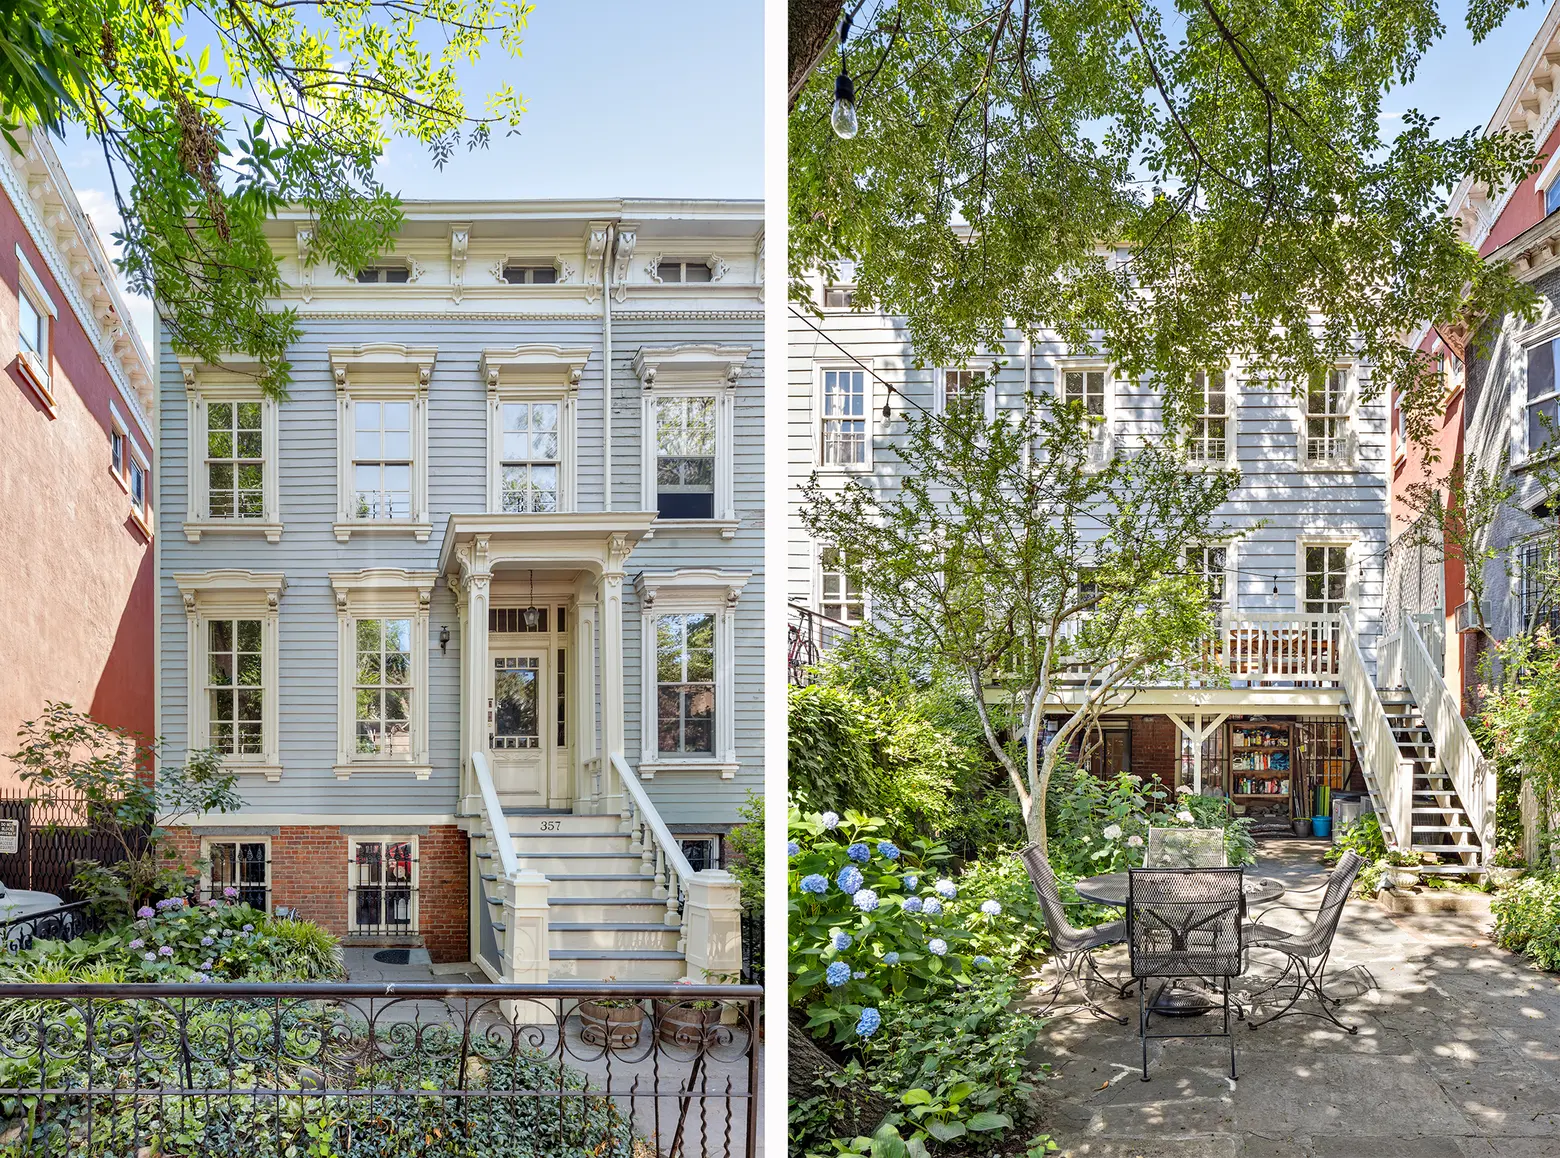 160-year-old wood-frame house in Clinton Hill is asking $3.75M